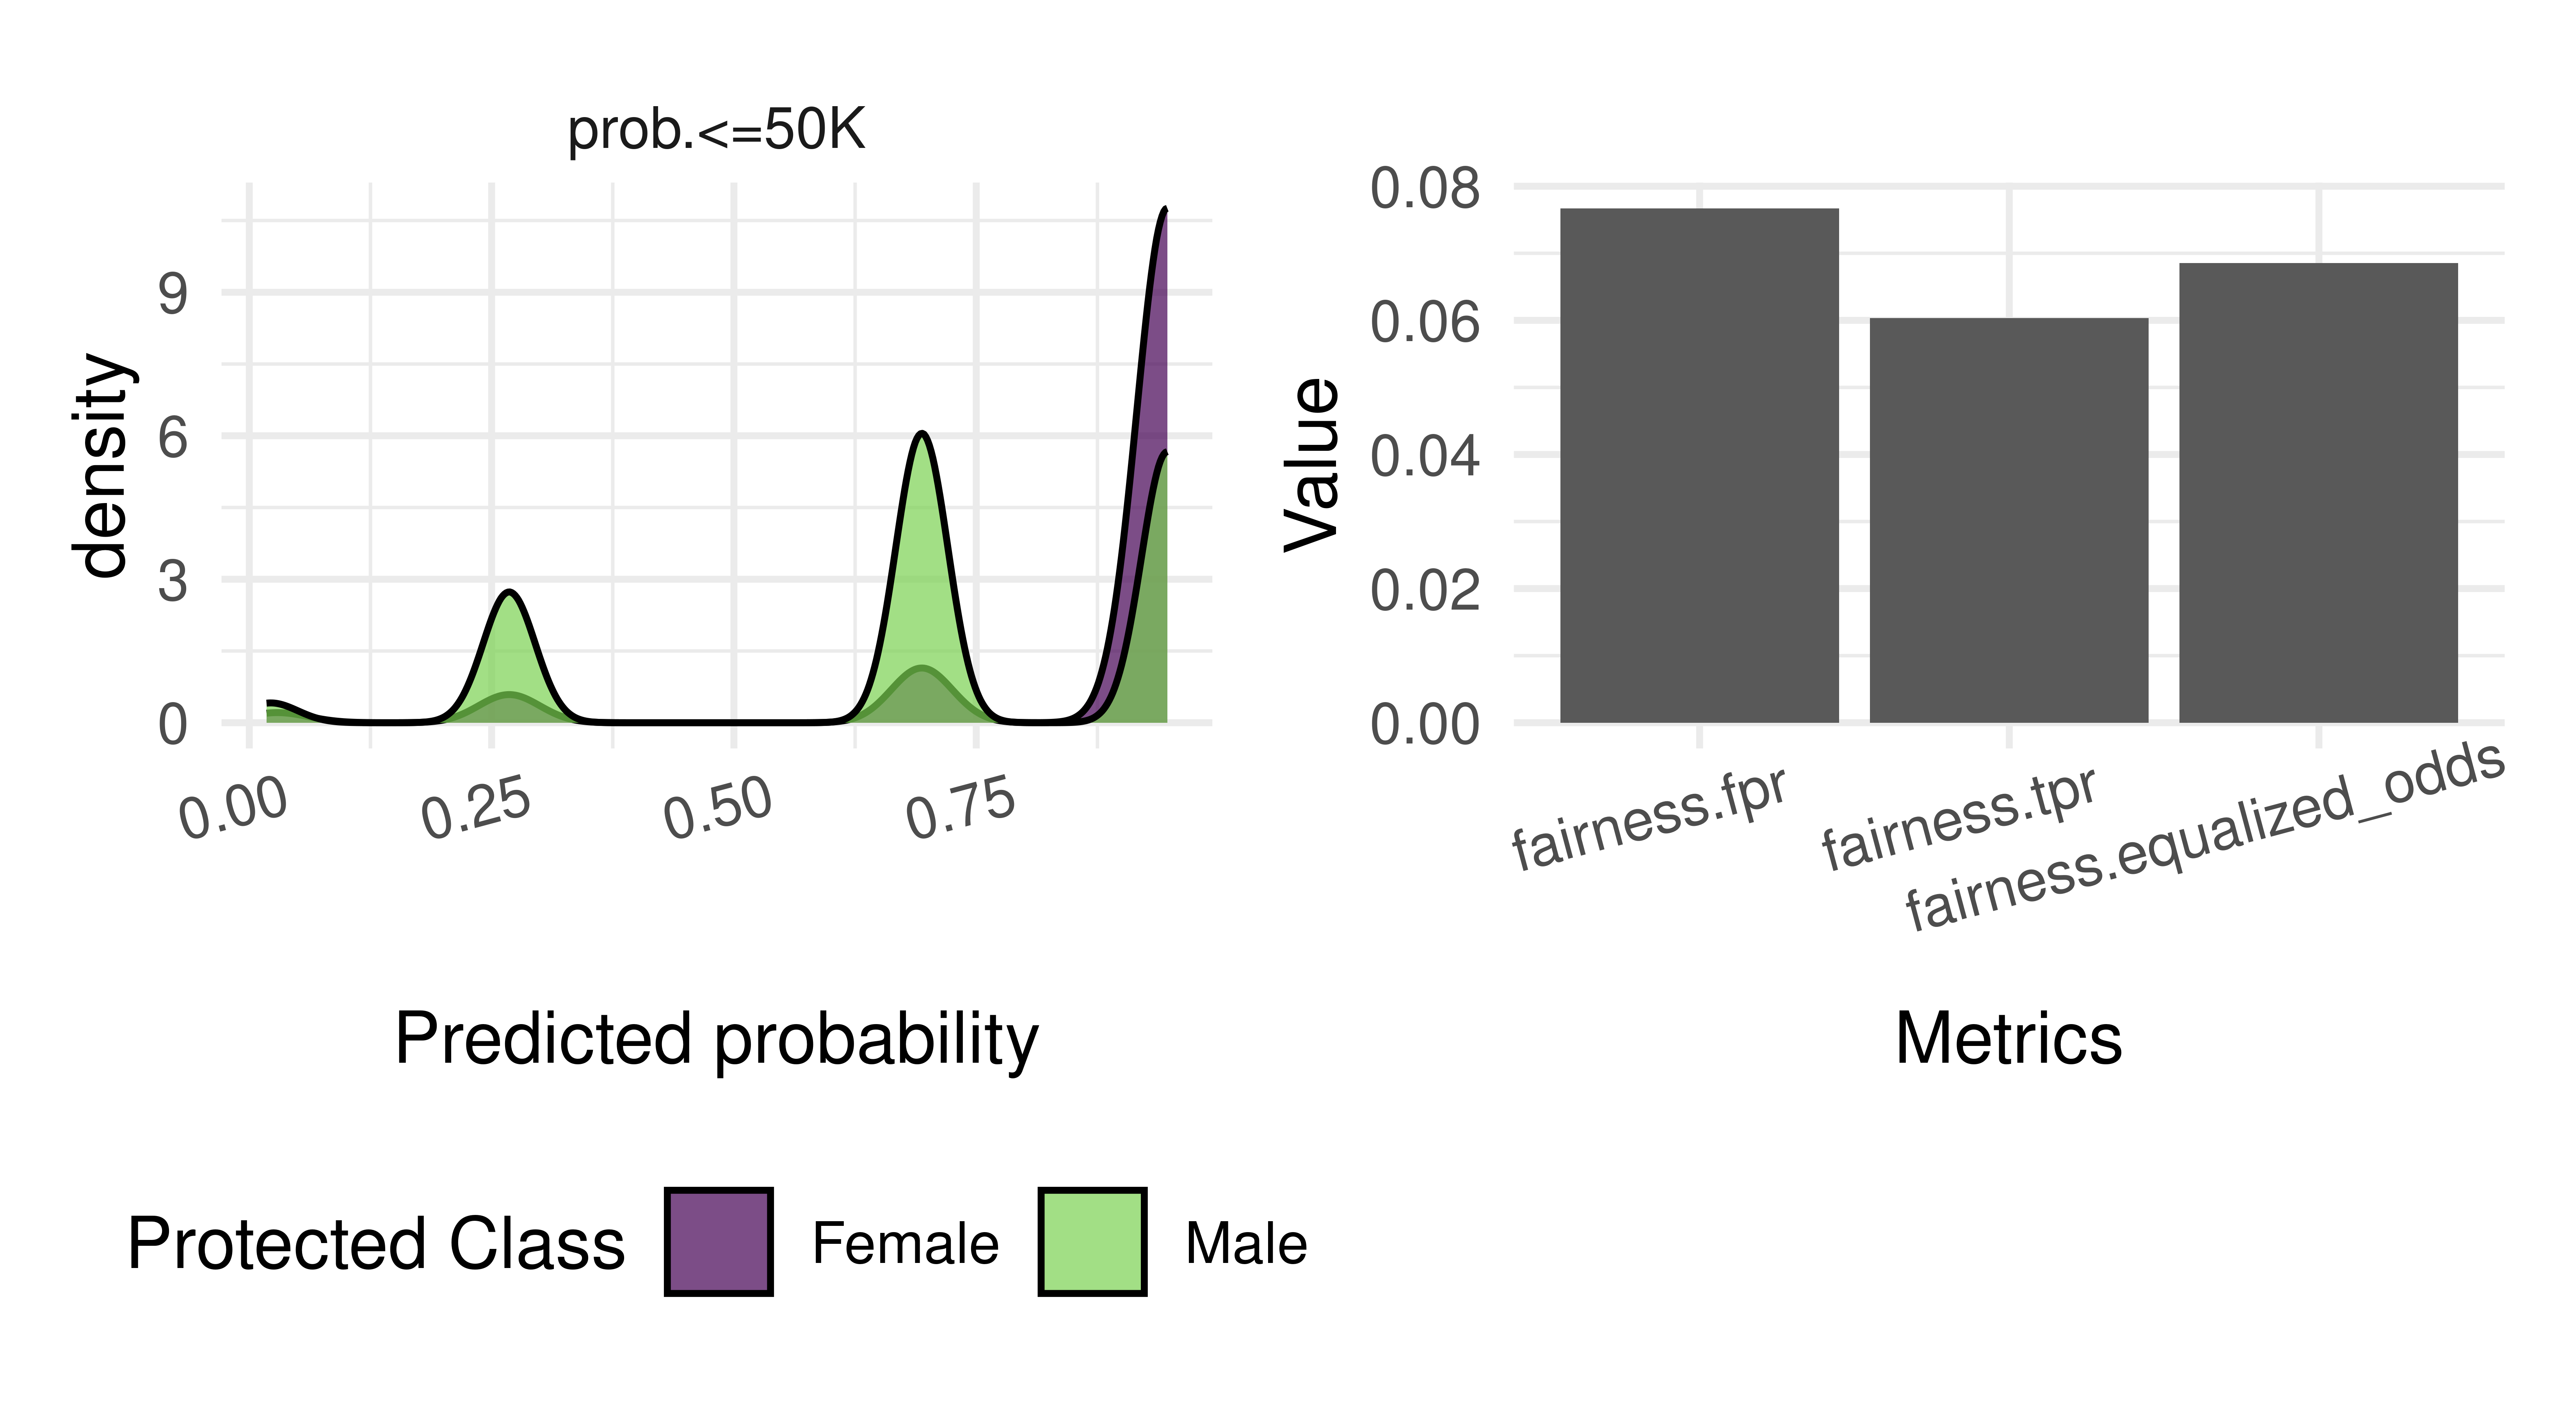 Two panel plot. Left: Density plot showing that 'Female' observations are more likely to be predicted as having a salary less than $50K than 'Male' observations. Right: Three bar charts for the metrics 'fairness.fpr', 'fairness.tpr', 'fairness.eod' with bars at roughly 0.08, 0.06, and 0.07 respectively.